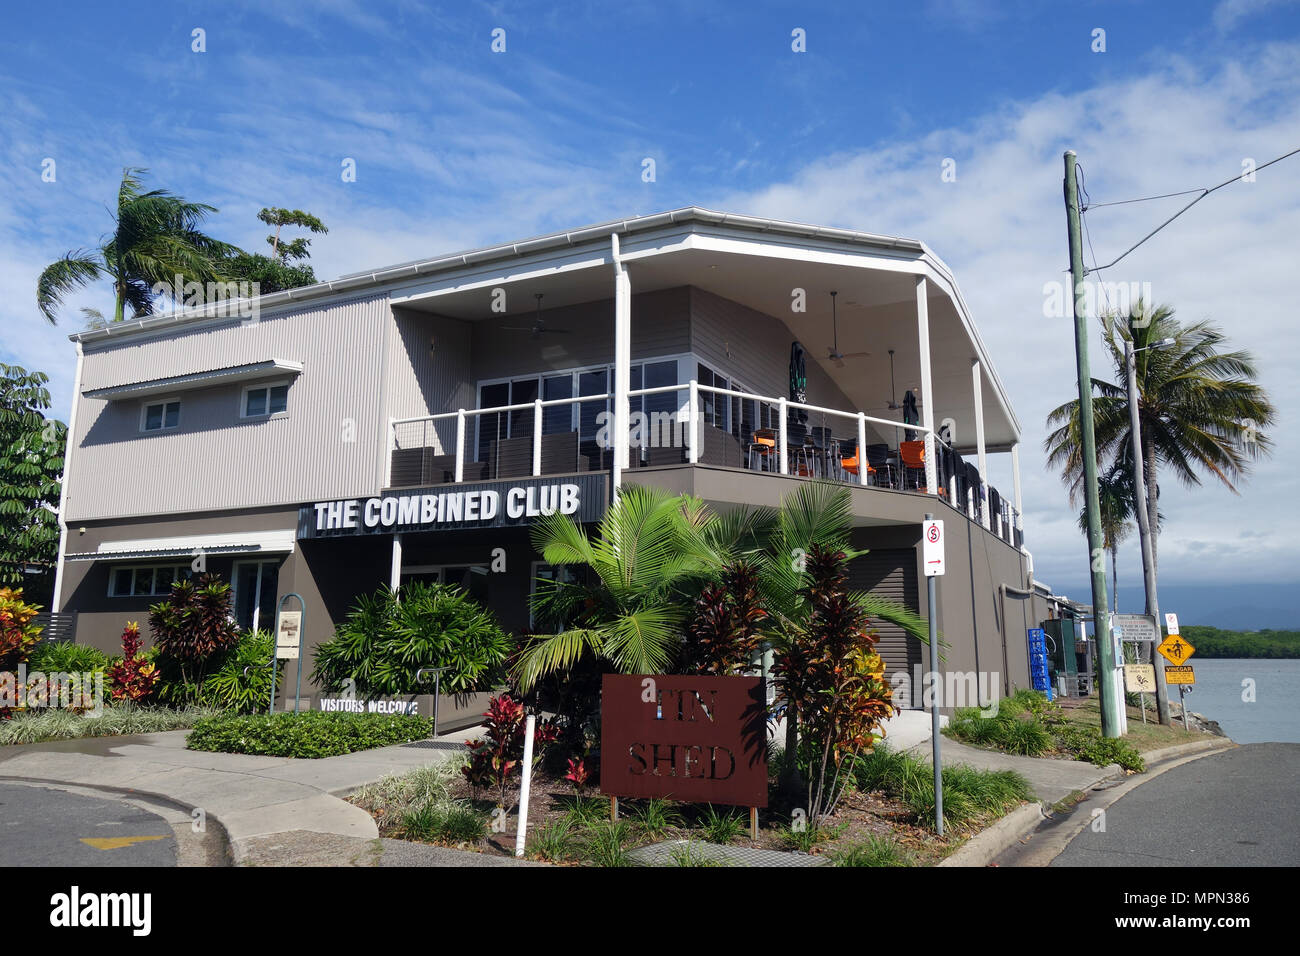 The Combined Club in the Tin Shed, Port Douglas, Queensland, Australia. No PR Stock Photo